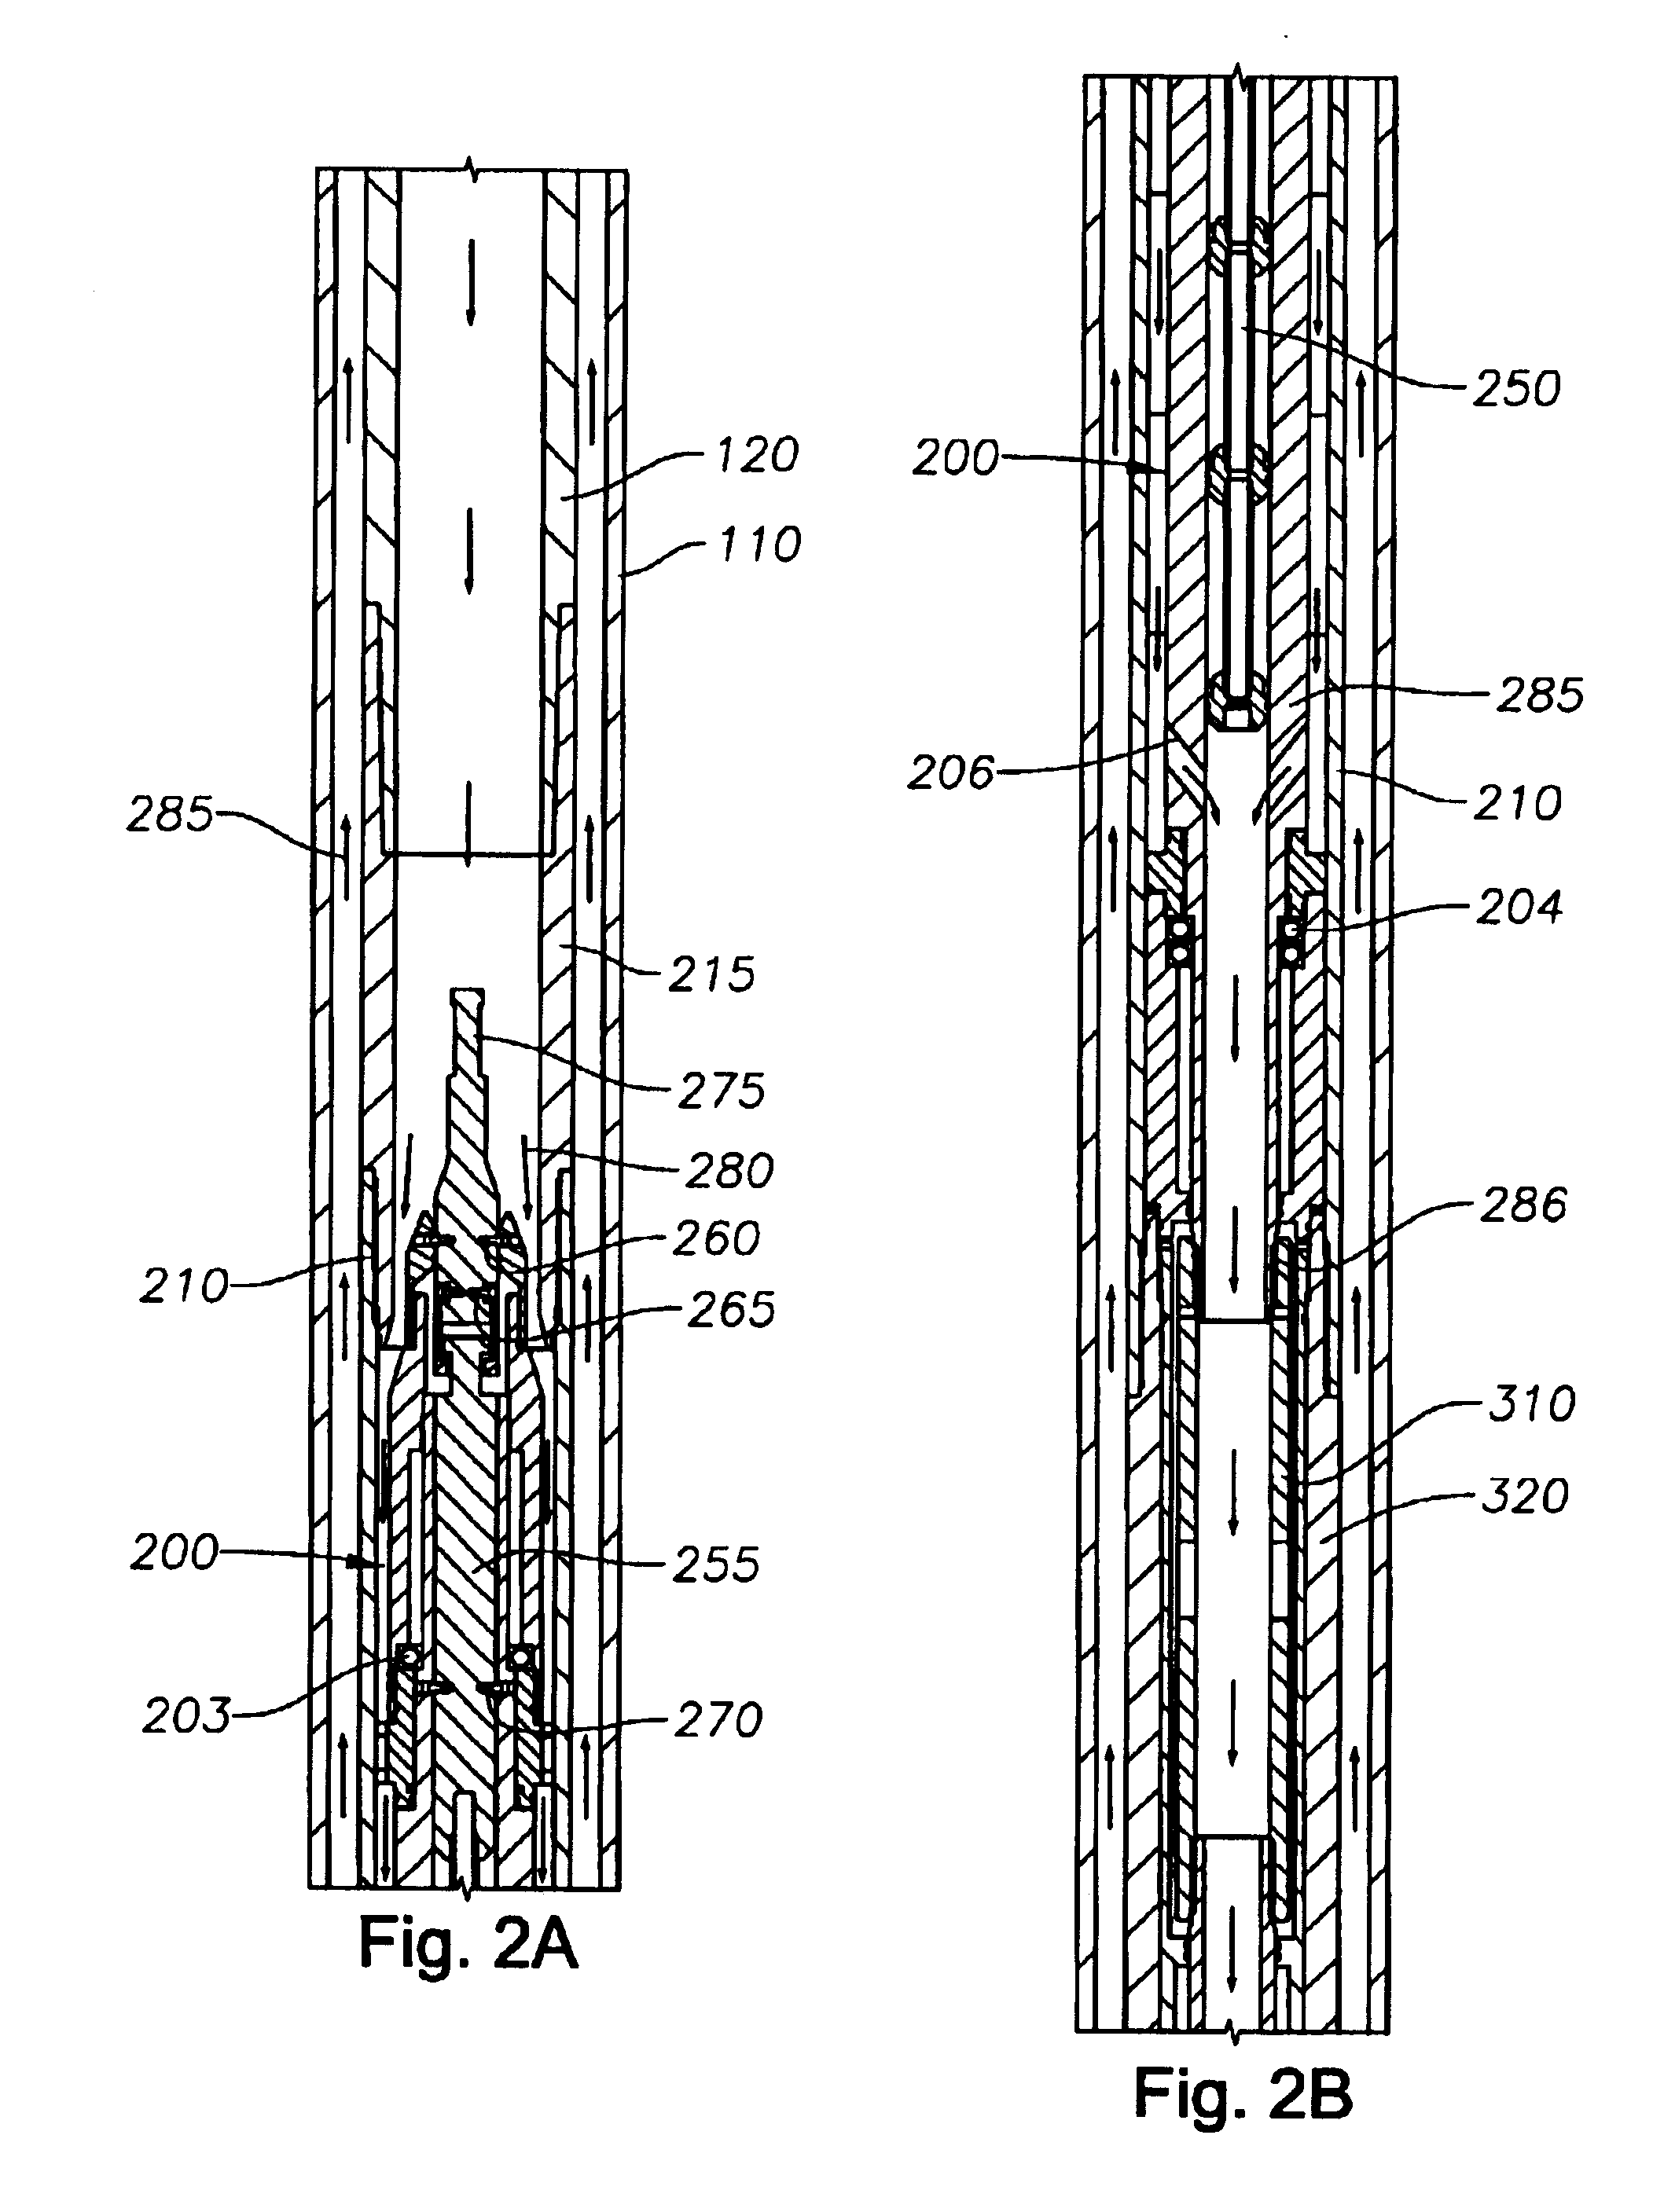 Apparatus and method to reduce fluid pressure in a wellbore